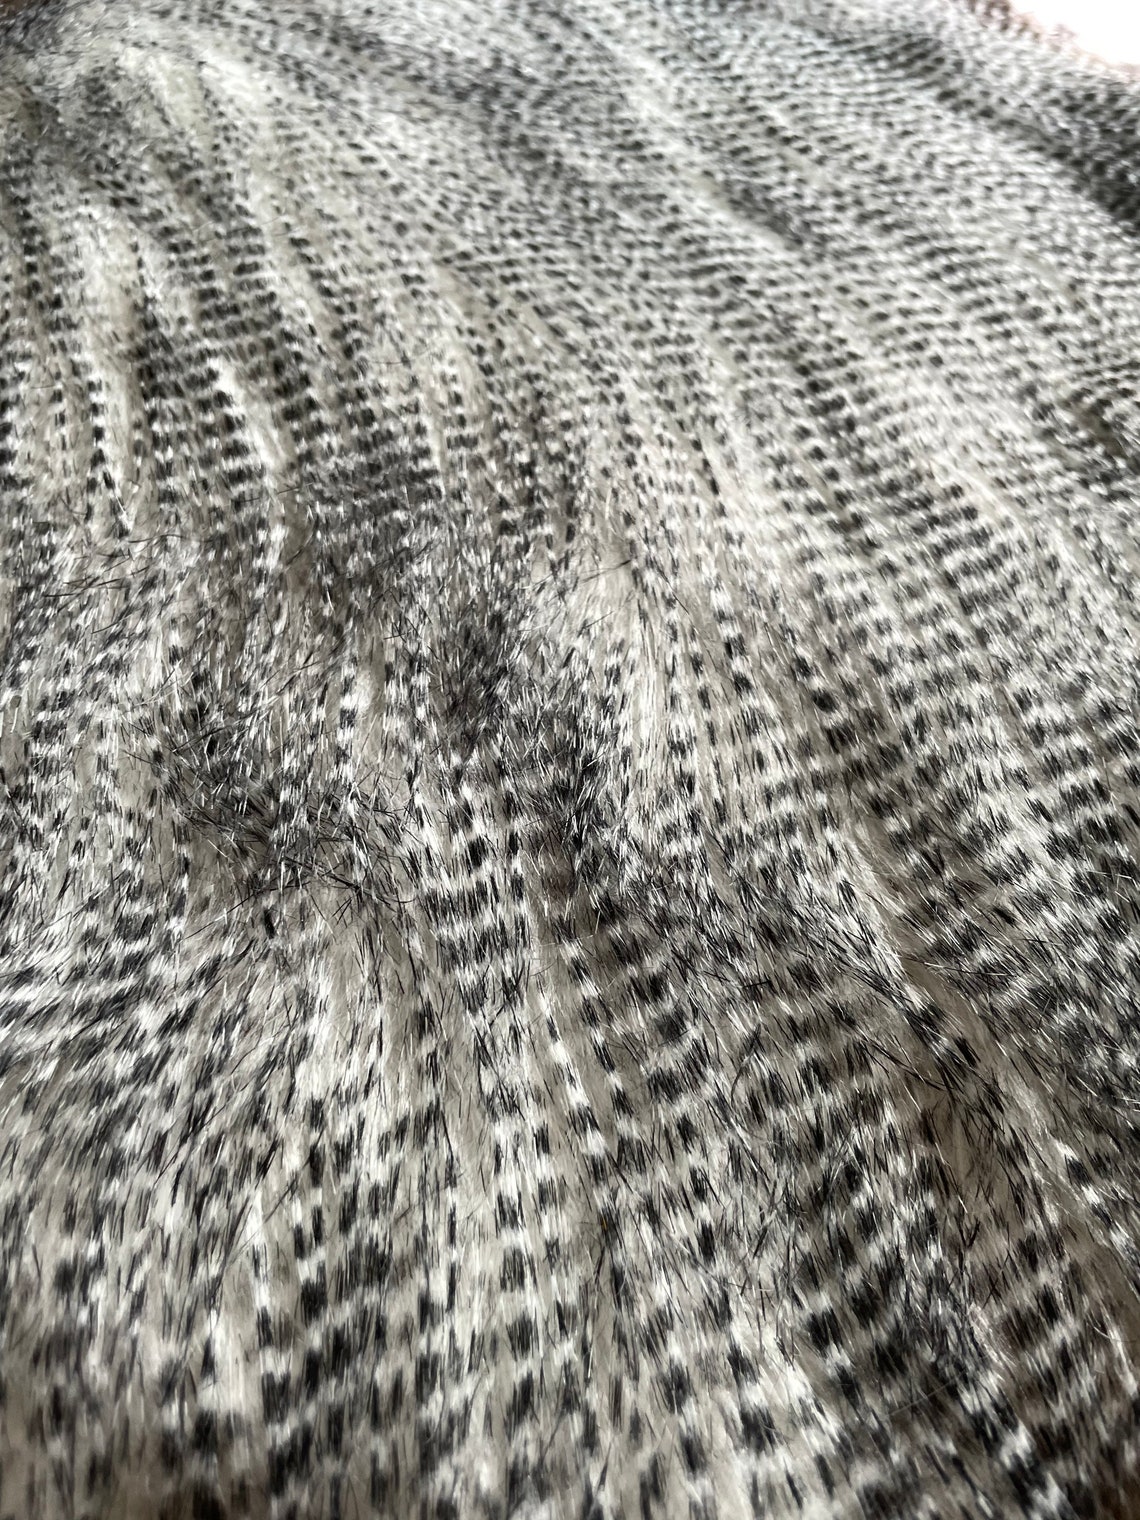 Grey and White Polyester Faux Fur Fabric | Etsy